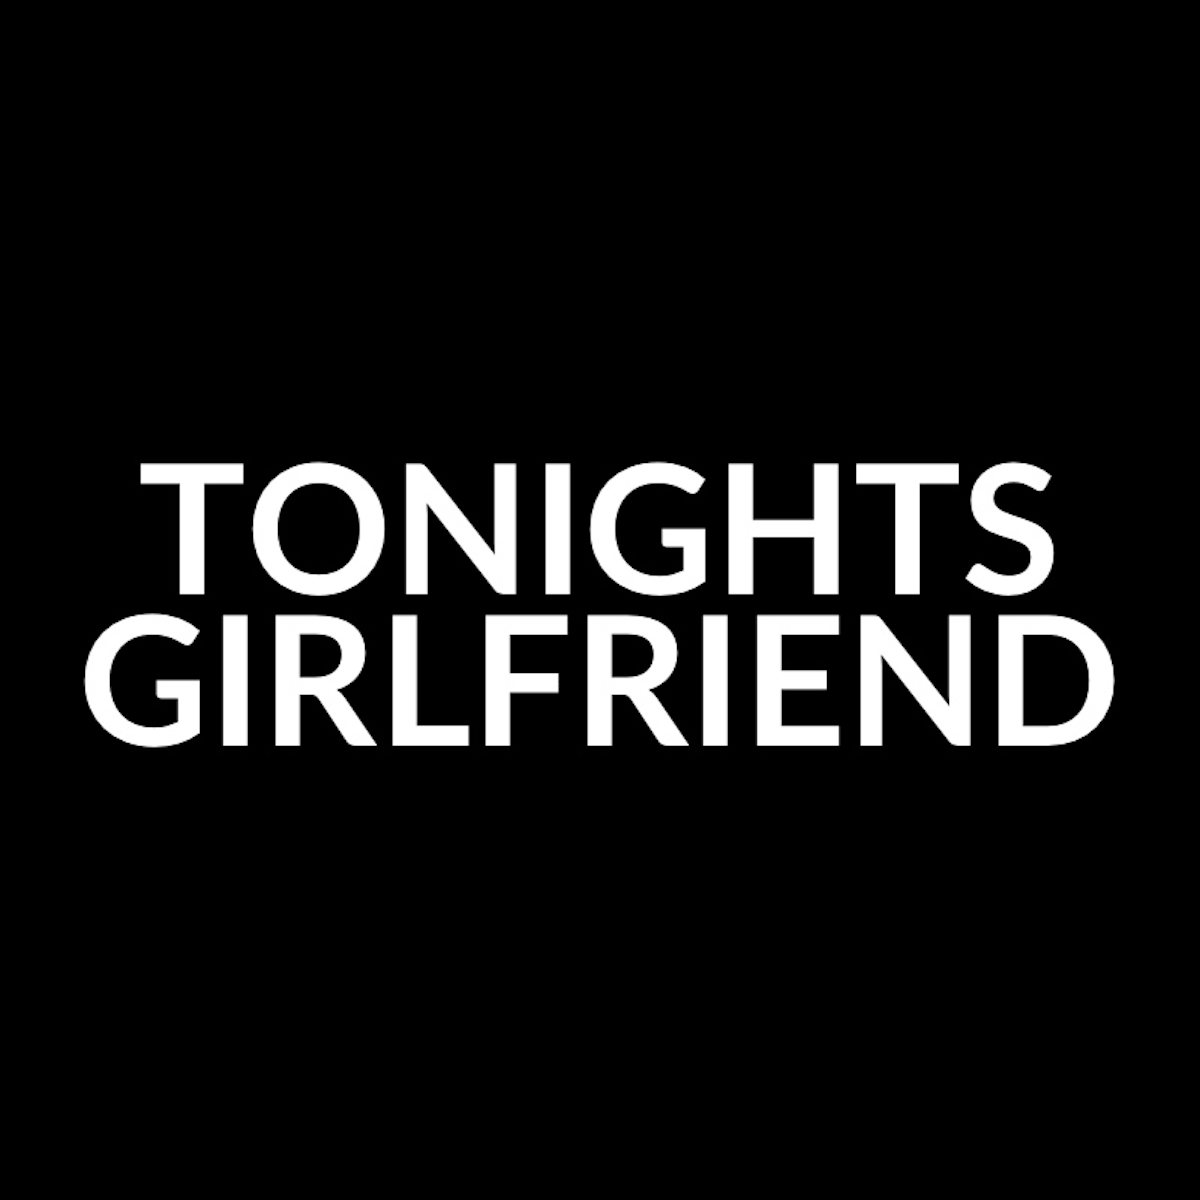 Tonight's Girlfriend explores the fantasy that money really can by you love